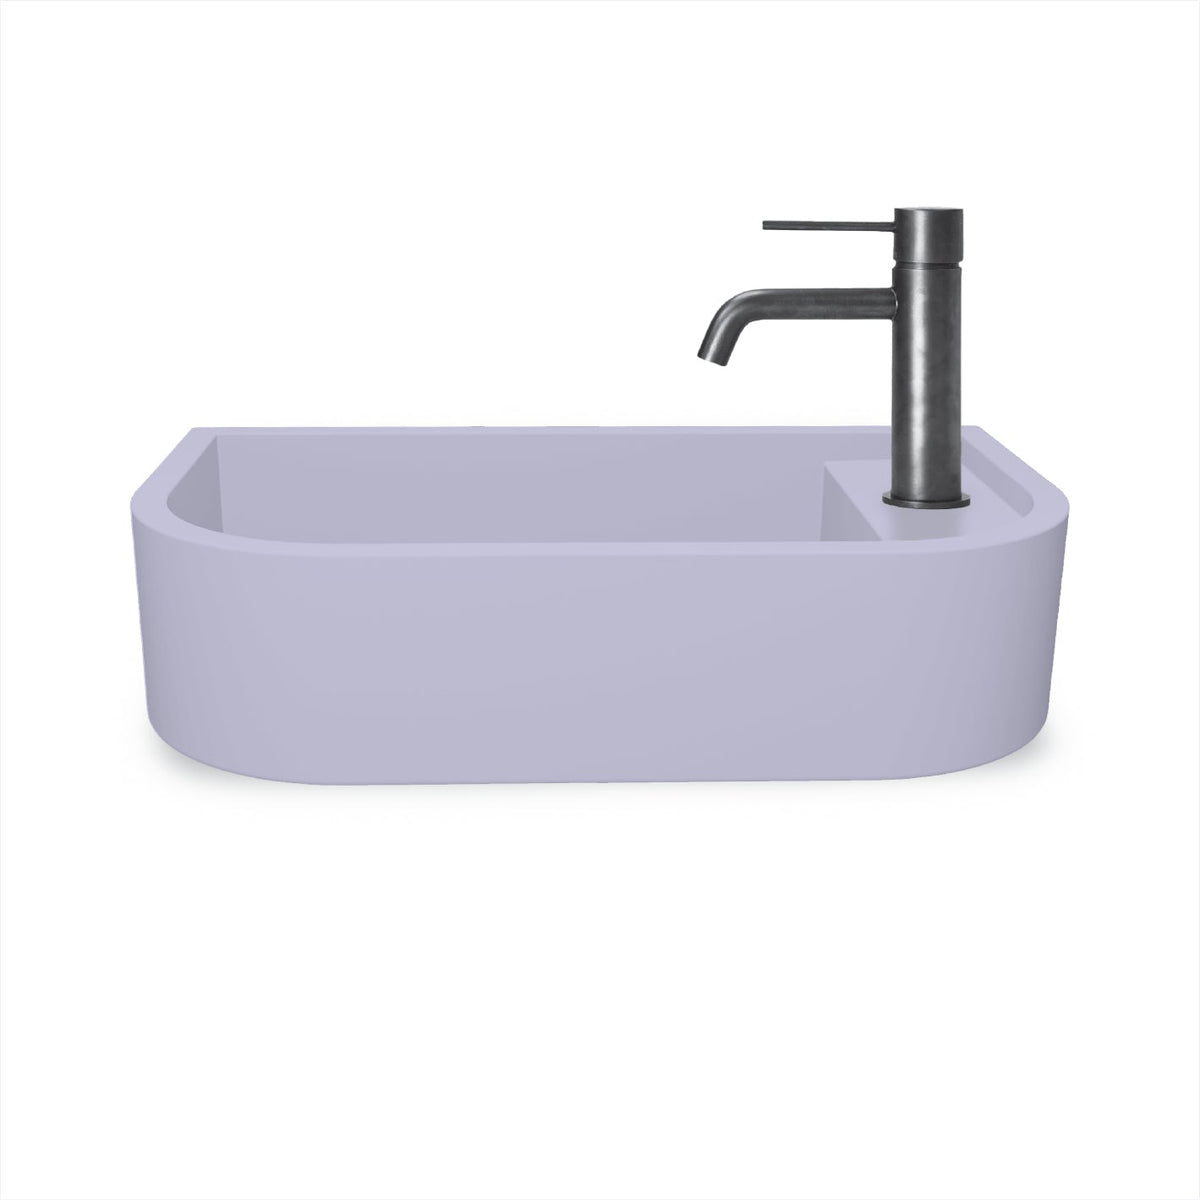 Loop 02 Basin - Overflow - Surface Mount (Lilac,Tap Hole,Brass)